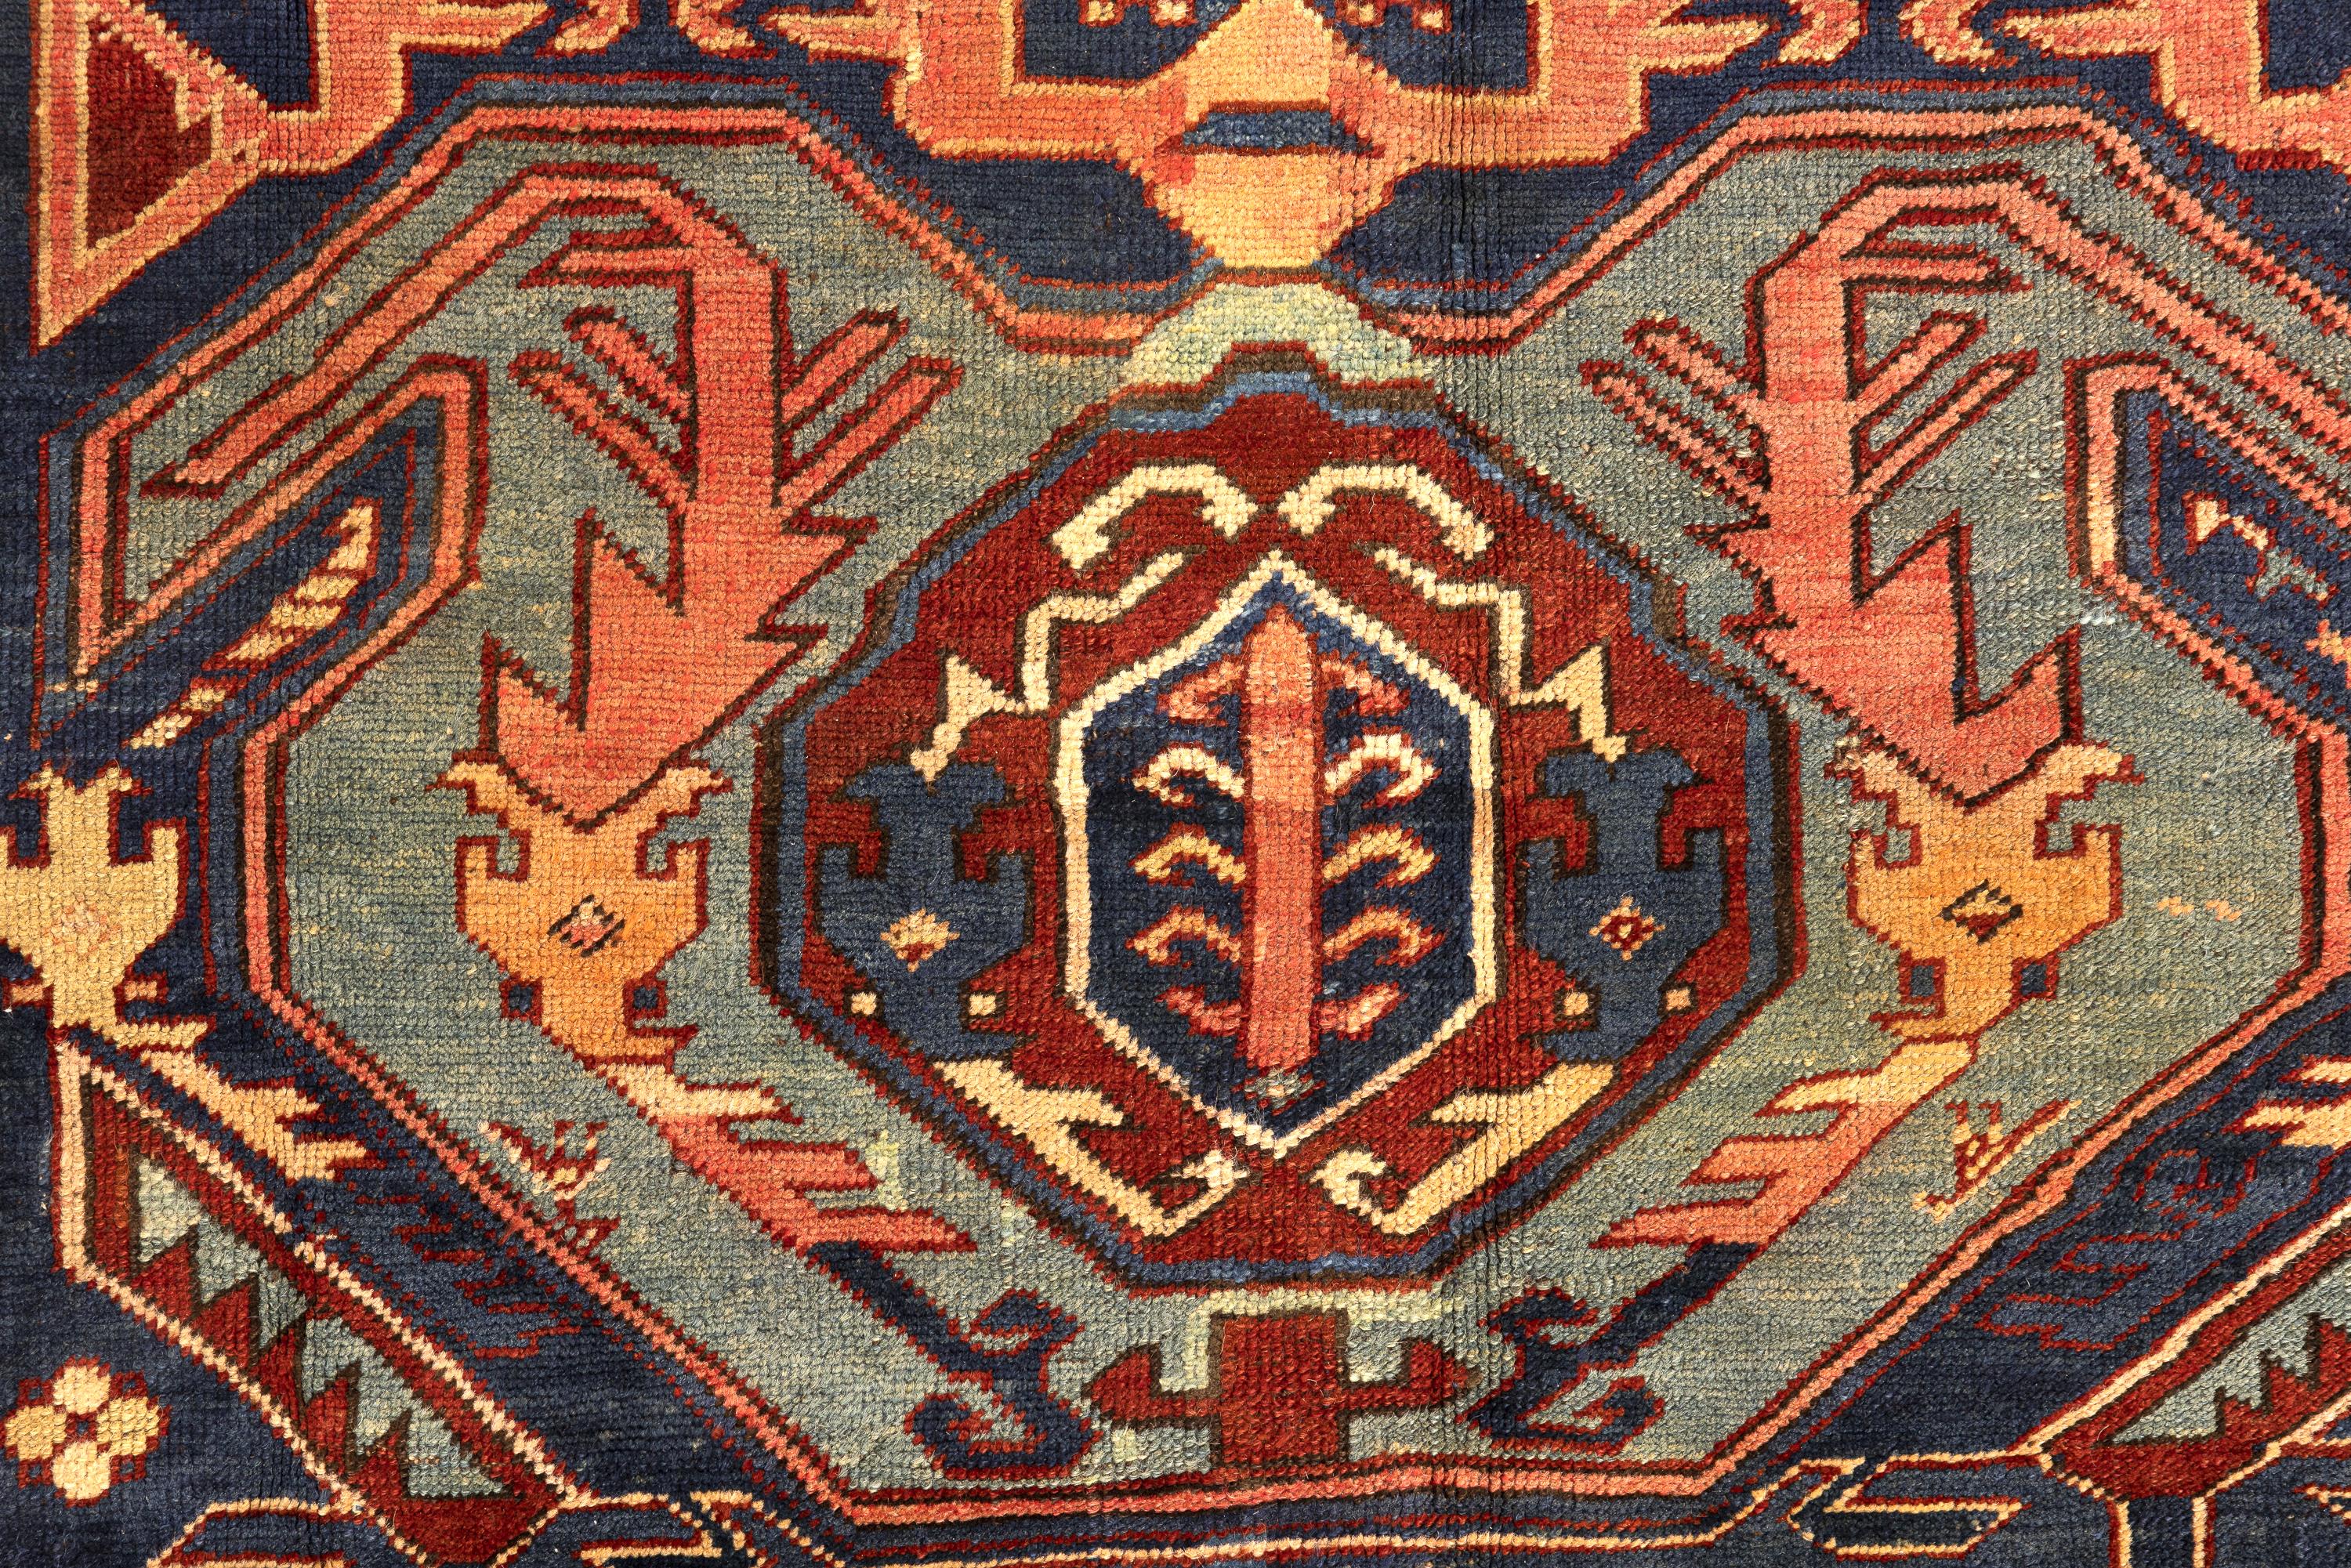 Lenkoran – Karabagh, South Caucasus

Magnificent Caucasian Lenkoran rug woven from the finest velvety wool found in the Talish region of Southern Azerbaijan. Made at the end of the 19th century and based on the esoteric traditions of the villages of